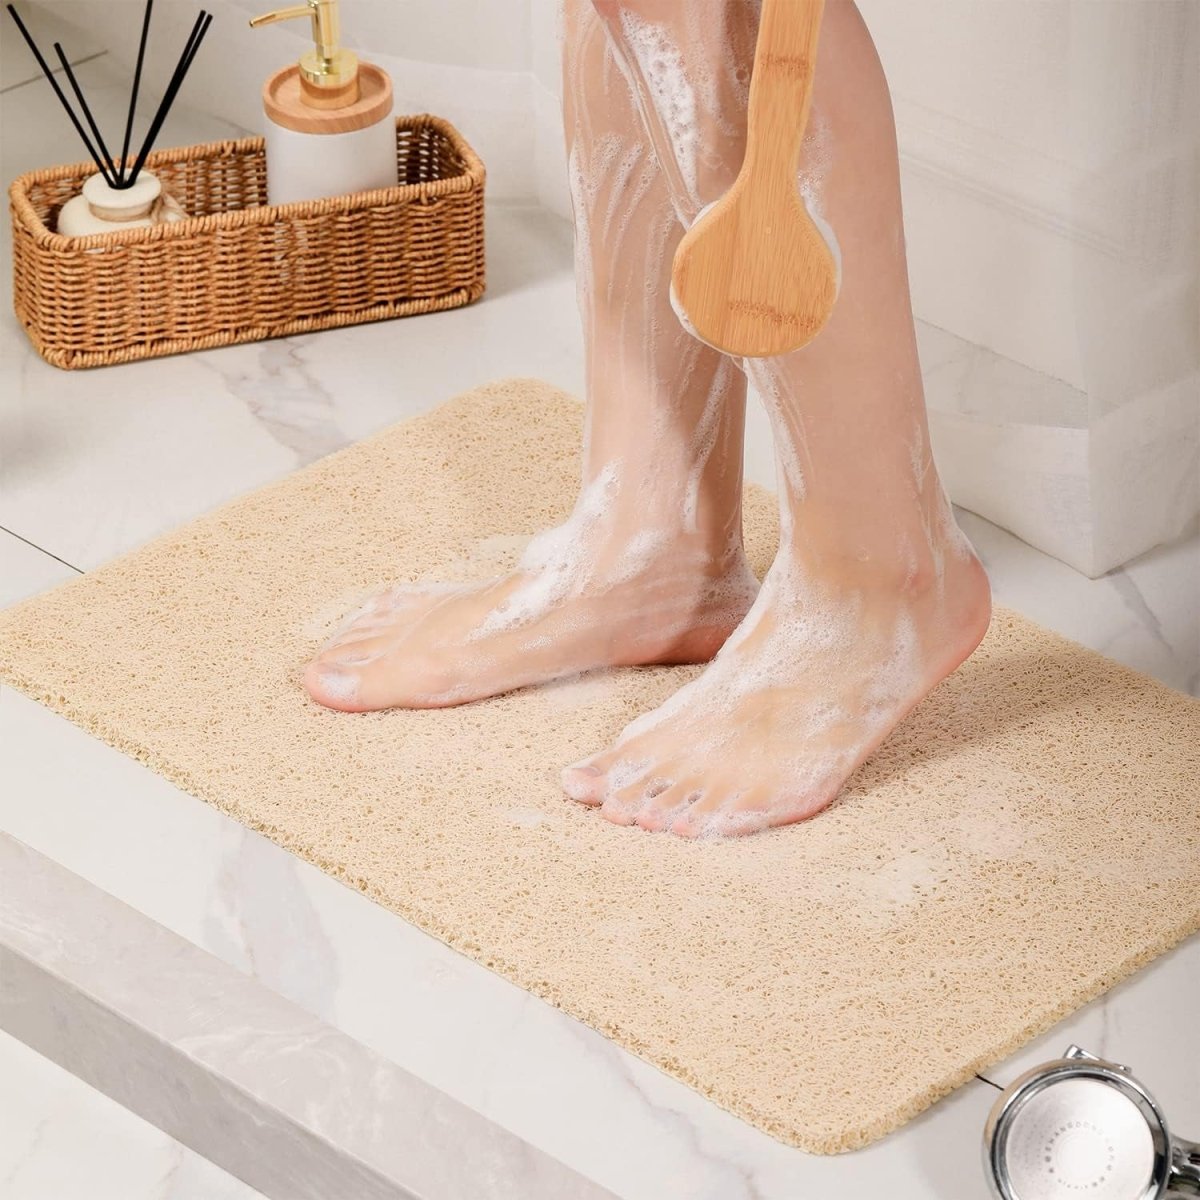 Quick-Dry Loofah Shower Mat - Non-Slip, Super Soft, and Mold-Resistant - Slips Away - B0BX2XGL6H -